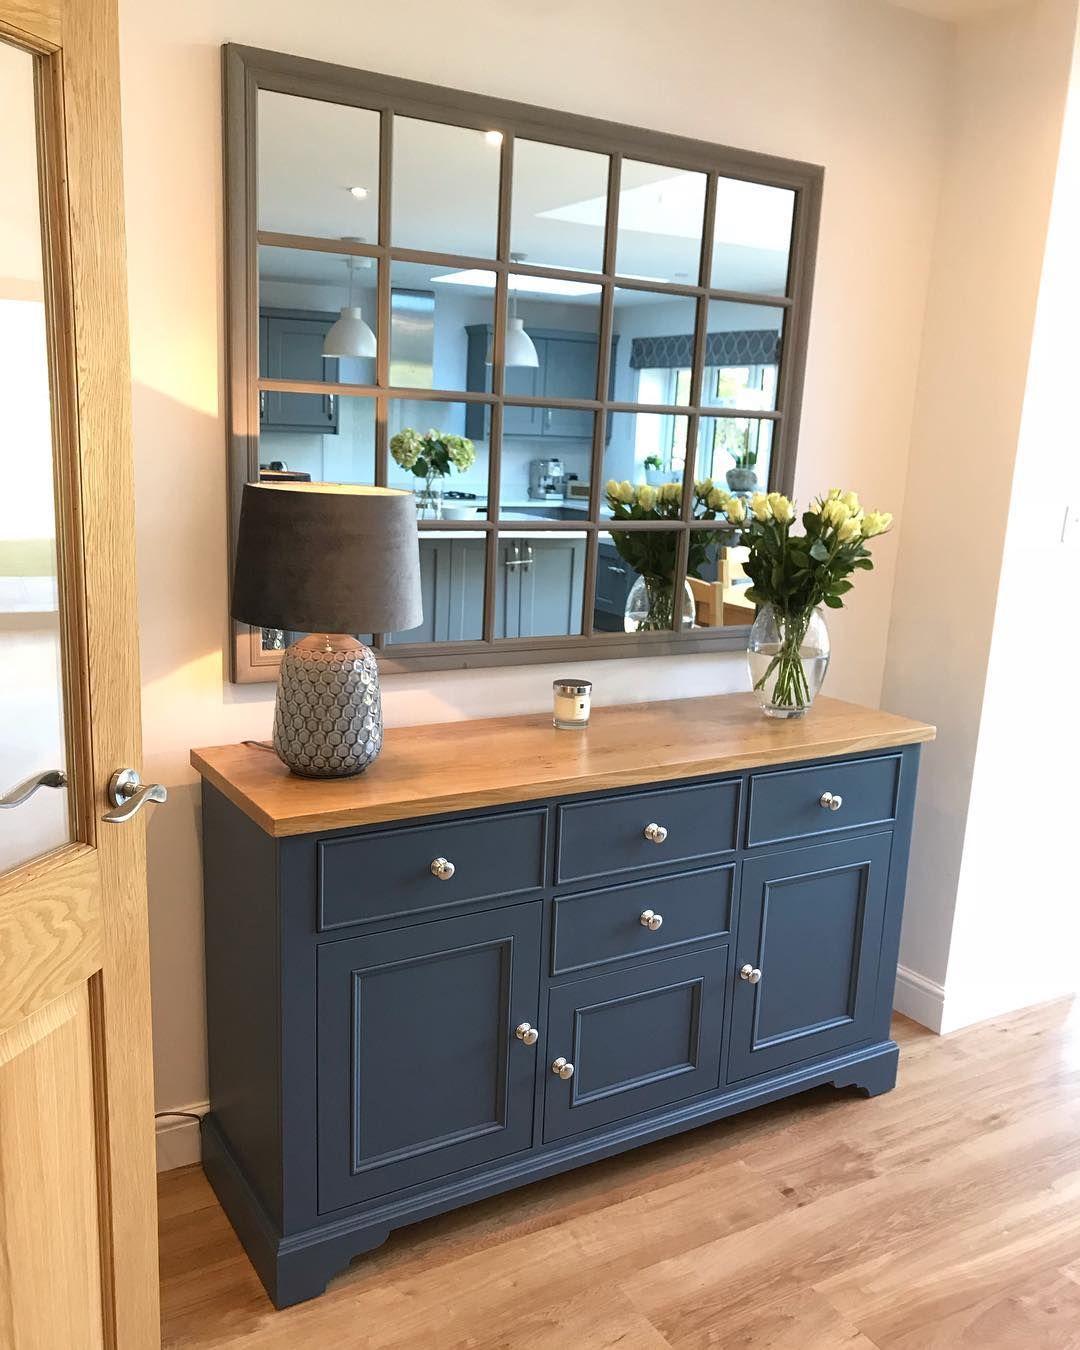 Renovatingno16 on Instagram: “Finally coming together, still needs a few finishing touches but I 💙 the blue #interiordesign #interiors #sideboard #renovation…”